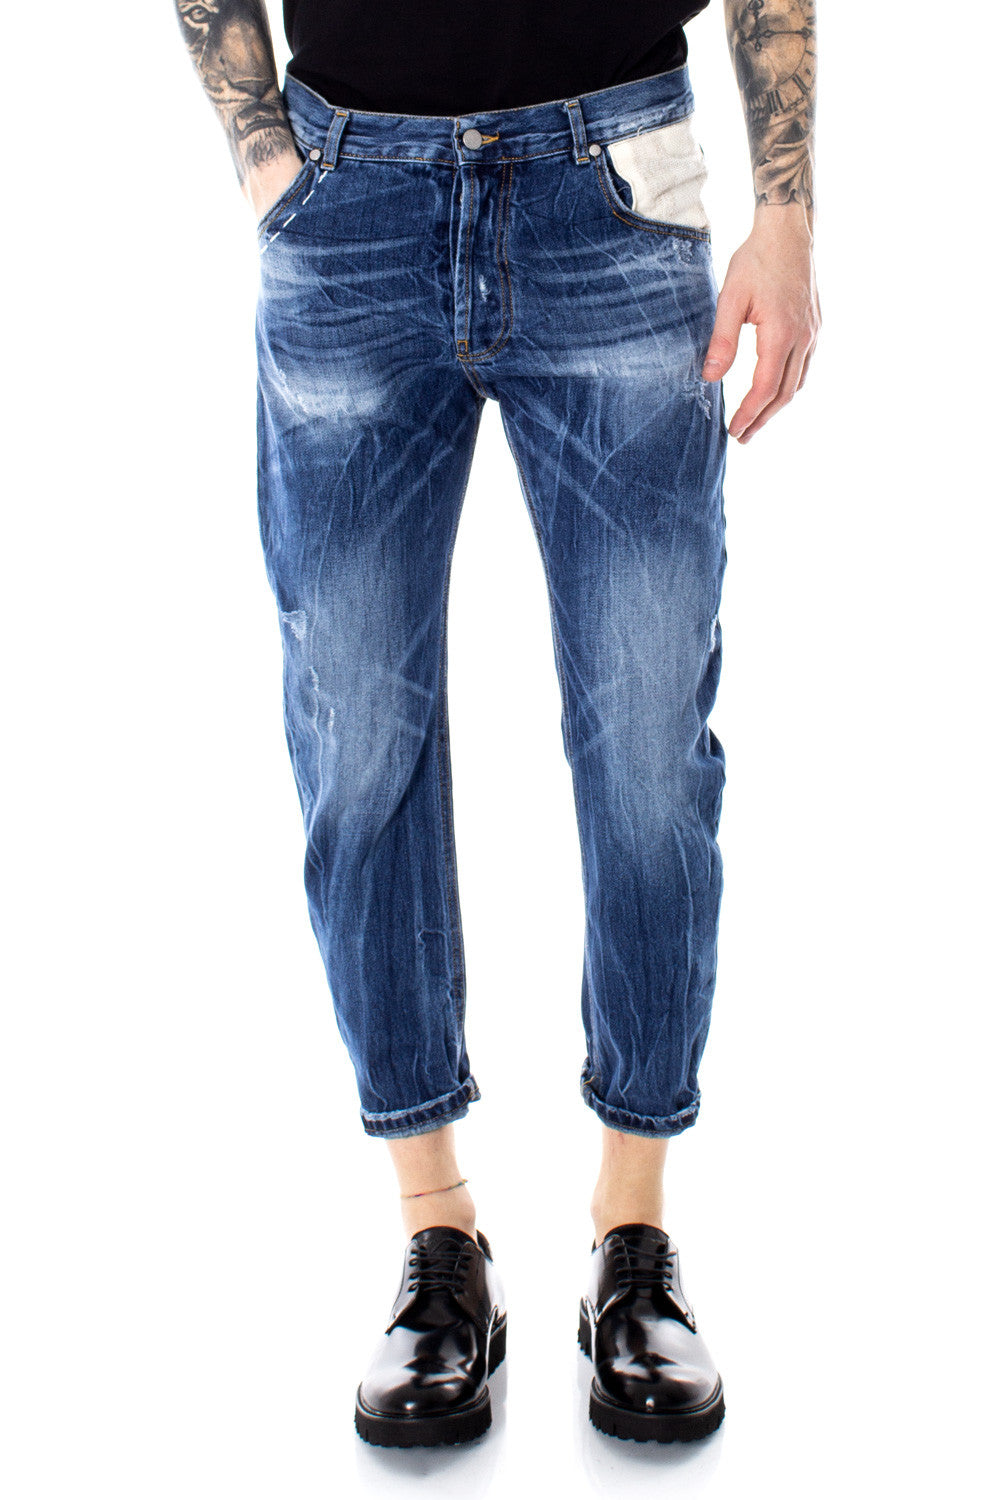 Over-d Jeans Uomo